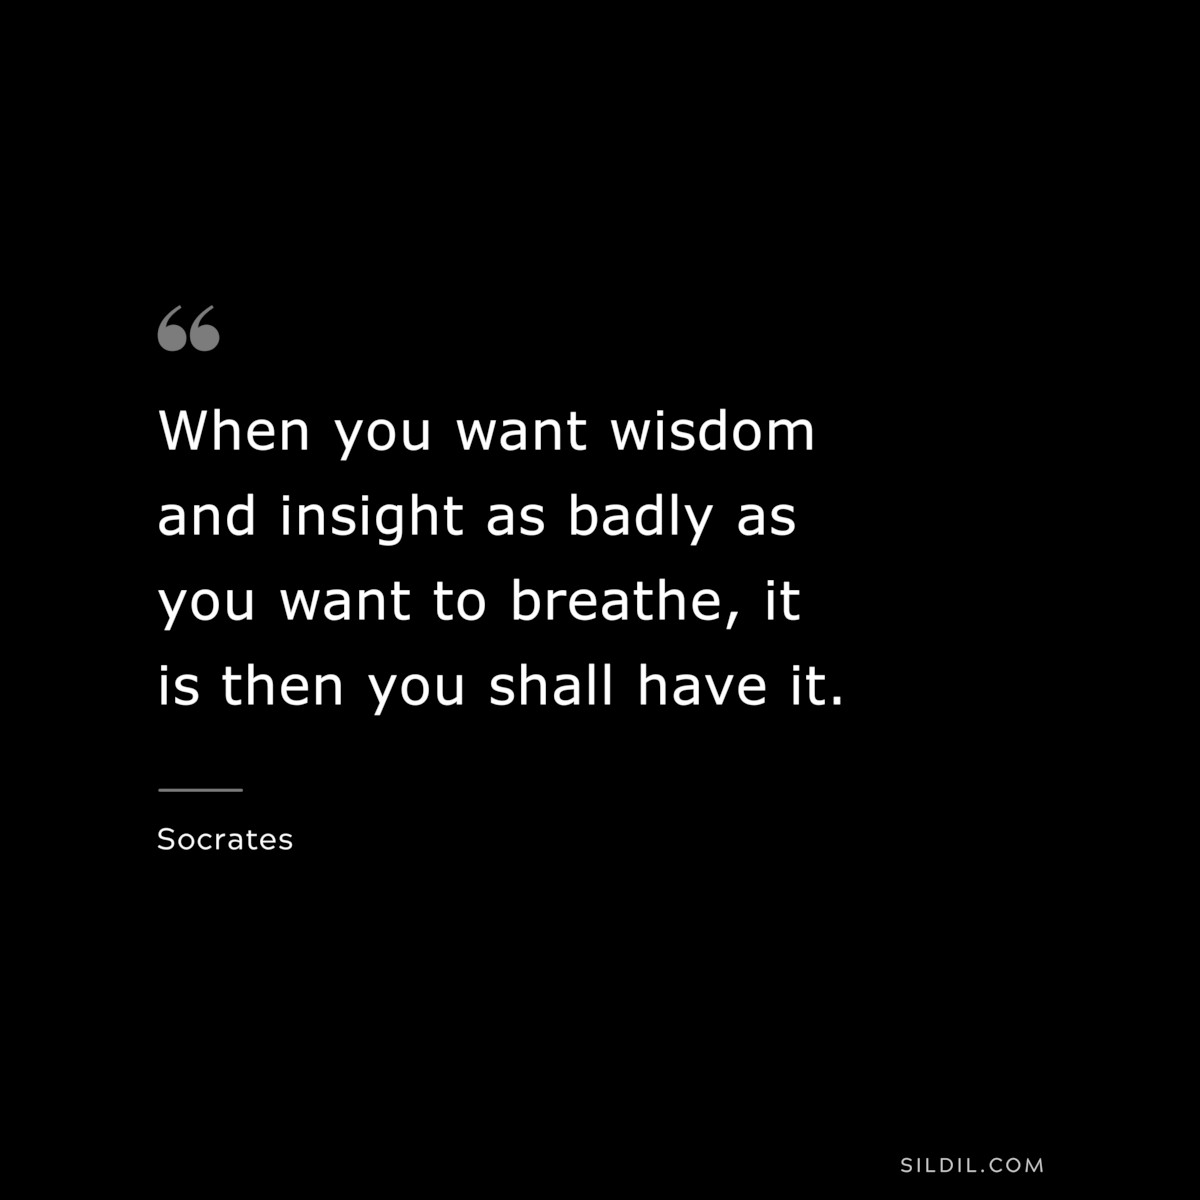 When you want wisdom and insight as badly as you want to breathe, it is then you shall have it. ― Socrates